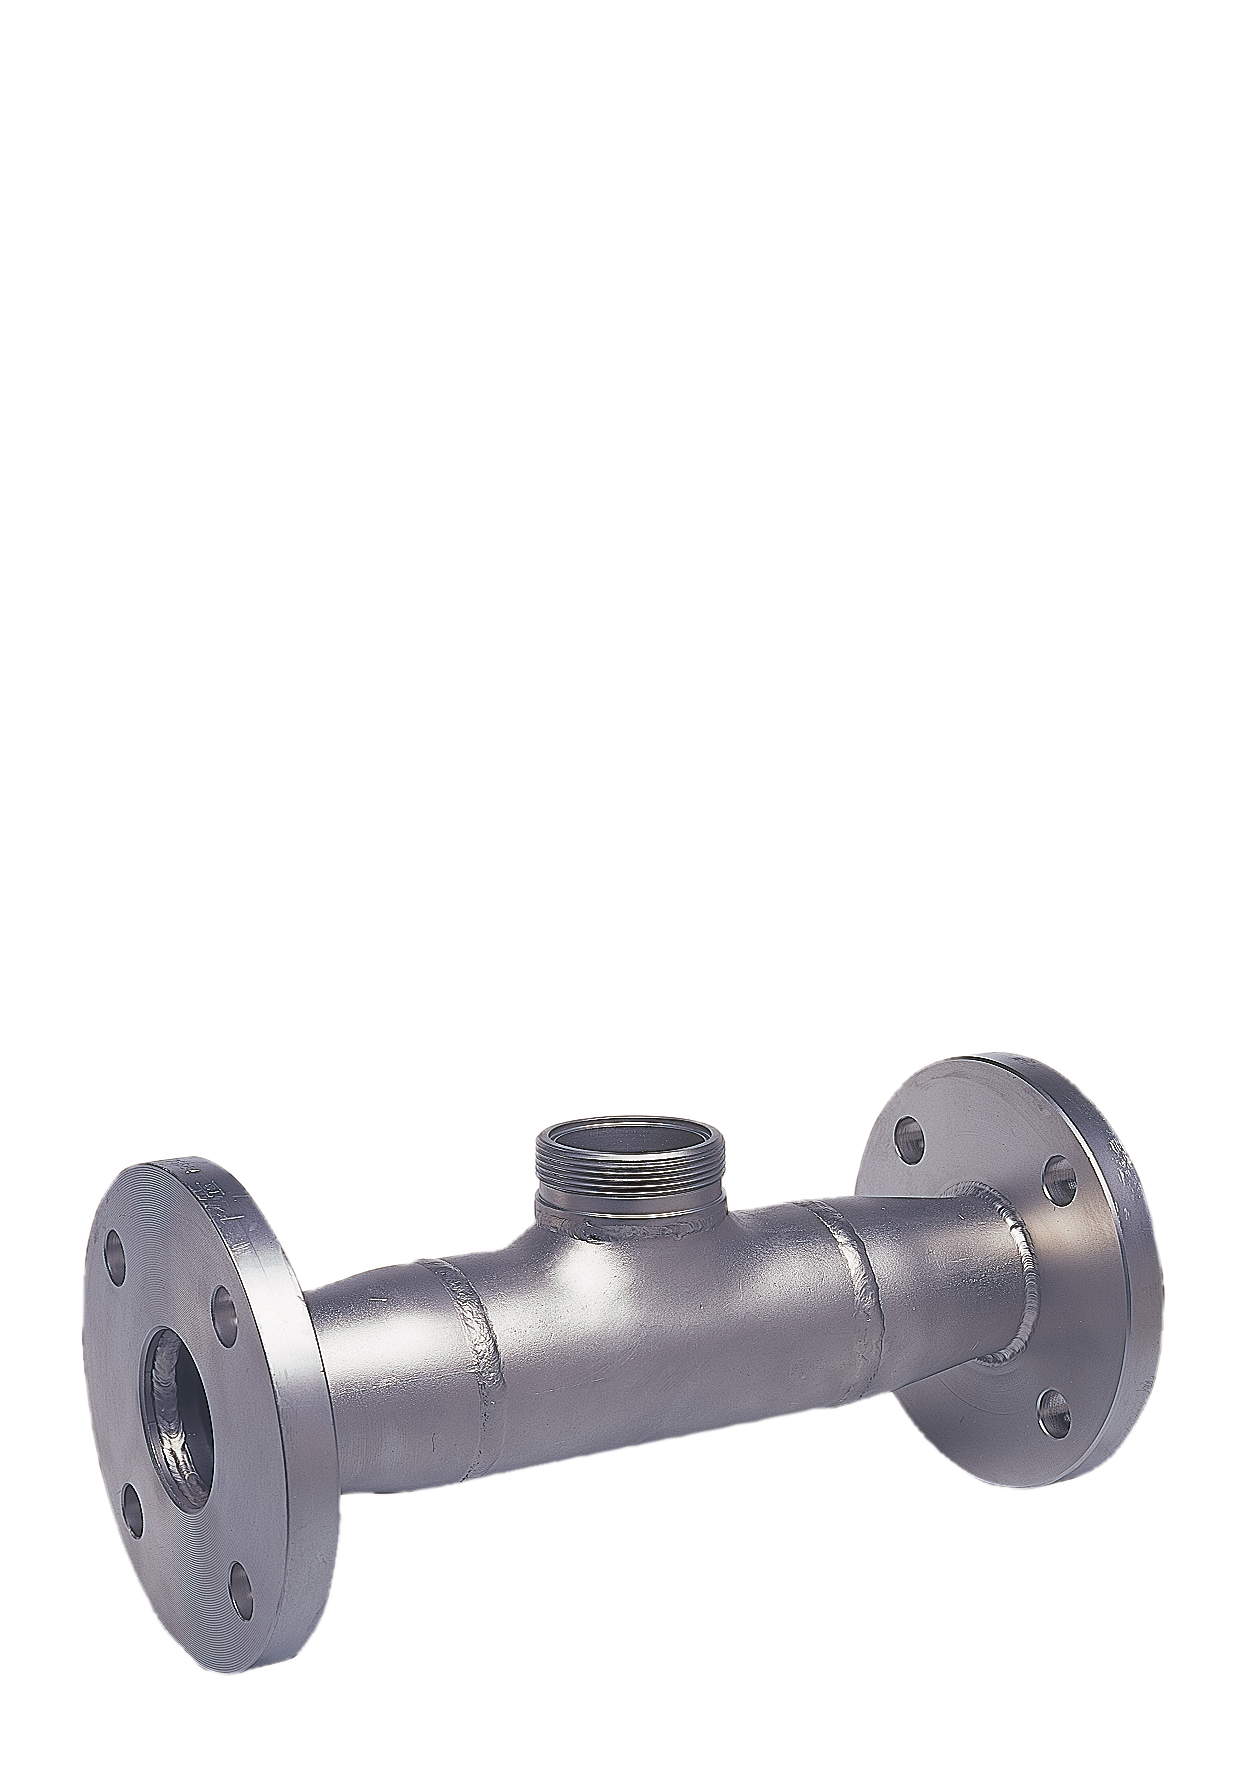 ARF240 Flow-Through Fitting | Stainless steel | For direct installation in pipelines with DN 50 cross-section